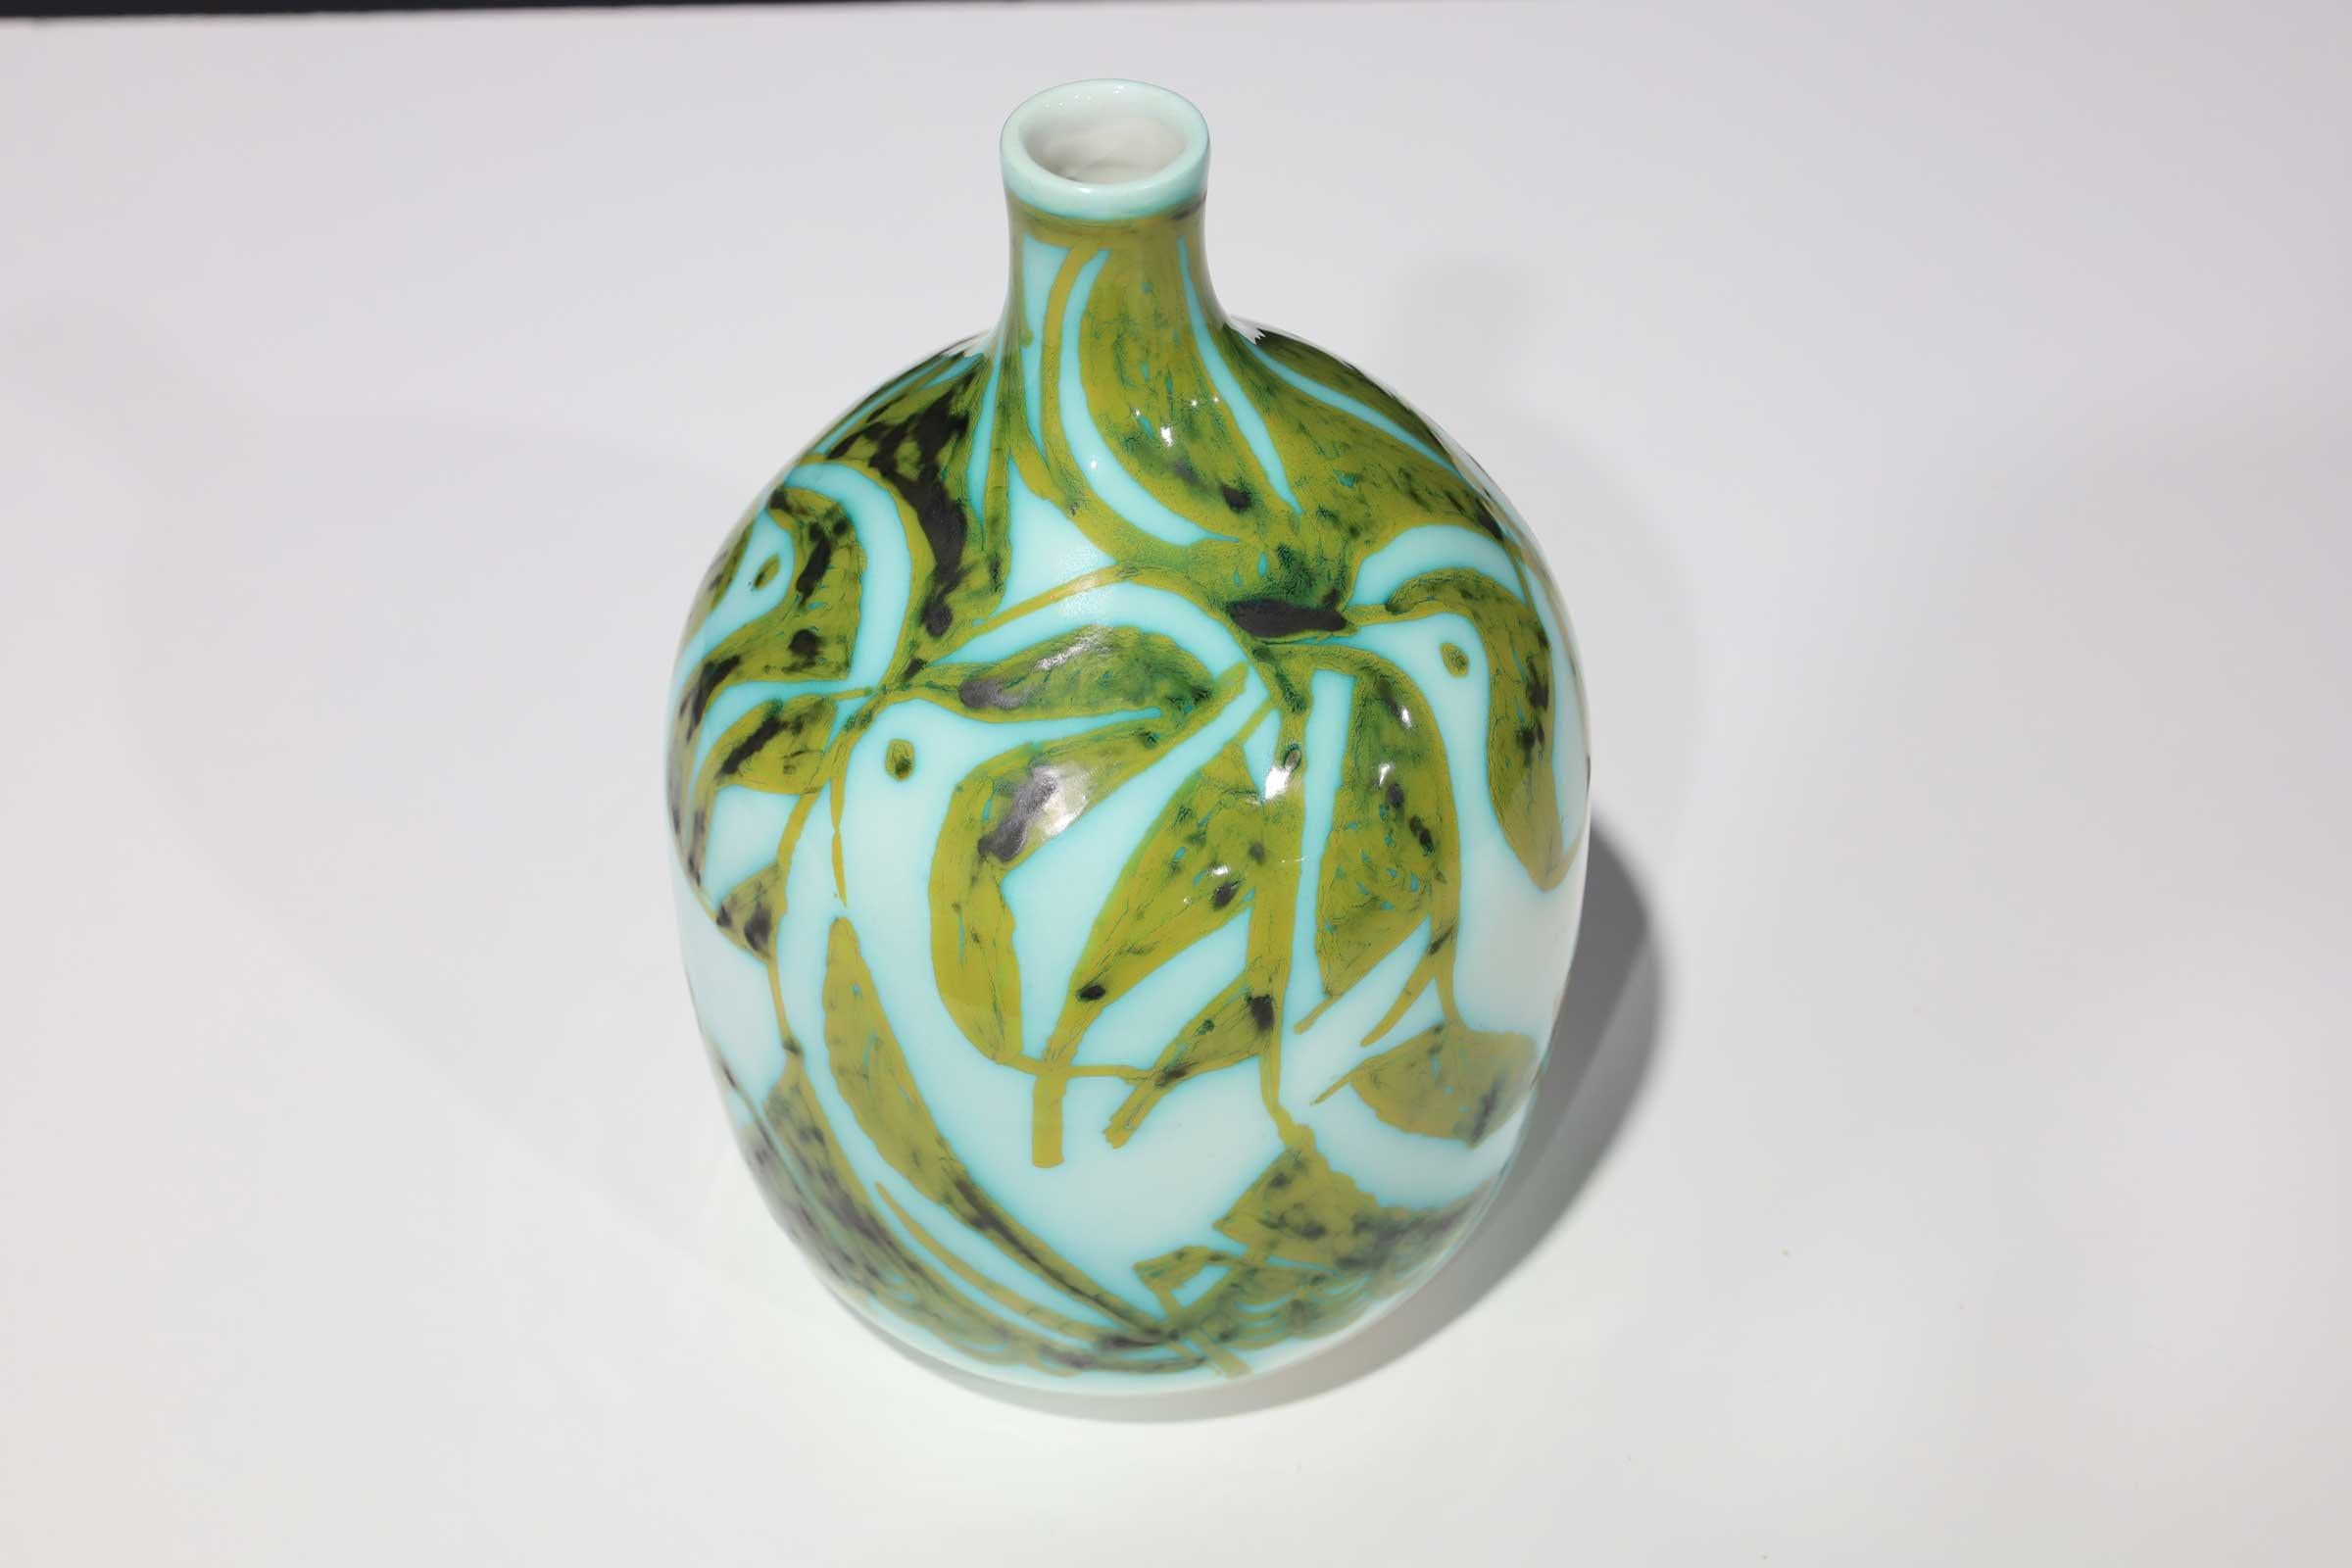 Alessio Tasca for Raymor Vase, Ceramic, Green and White, Signed For Sale 2